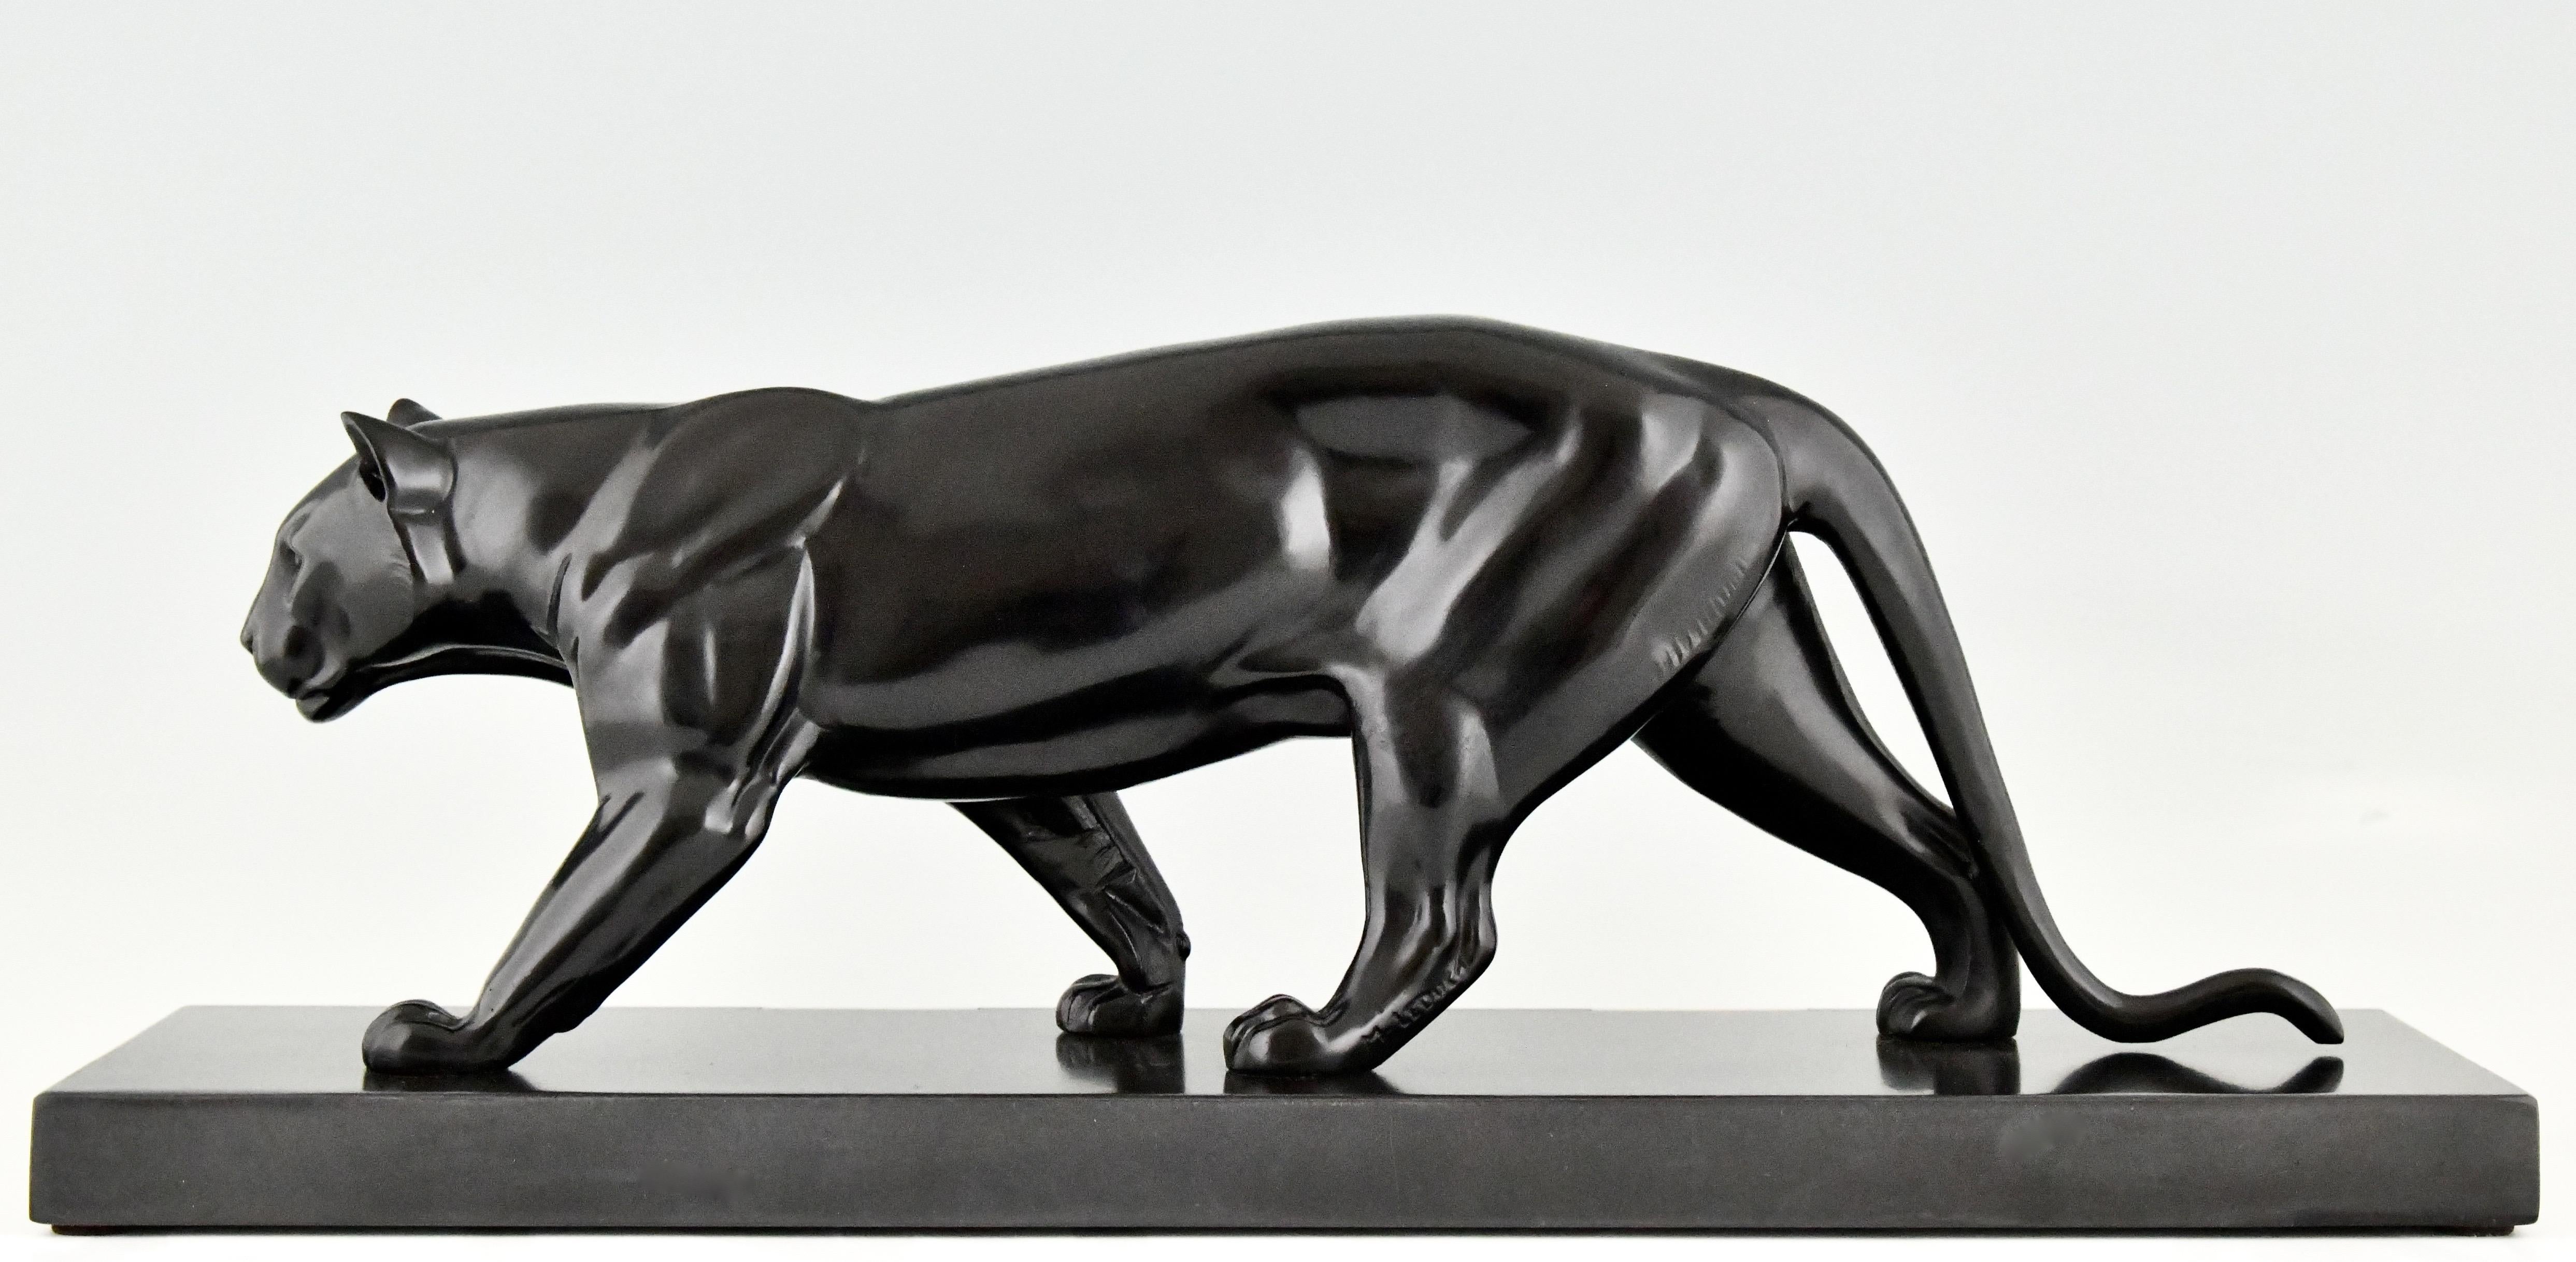 Mid-20th Century Art Deco Sculpture of a Panther by M. Leducq on Marble Base, France 1930